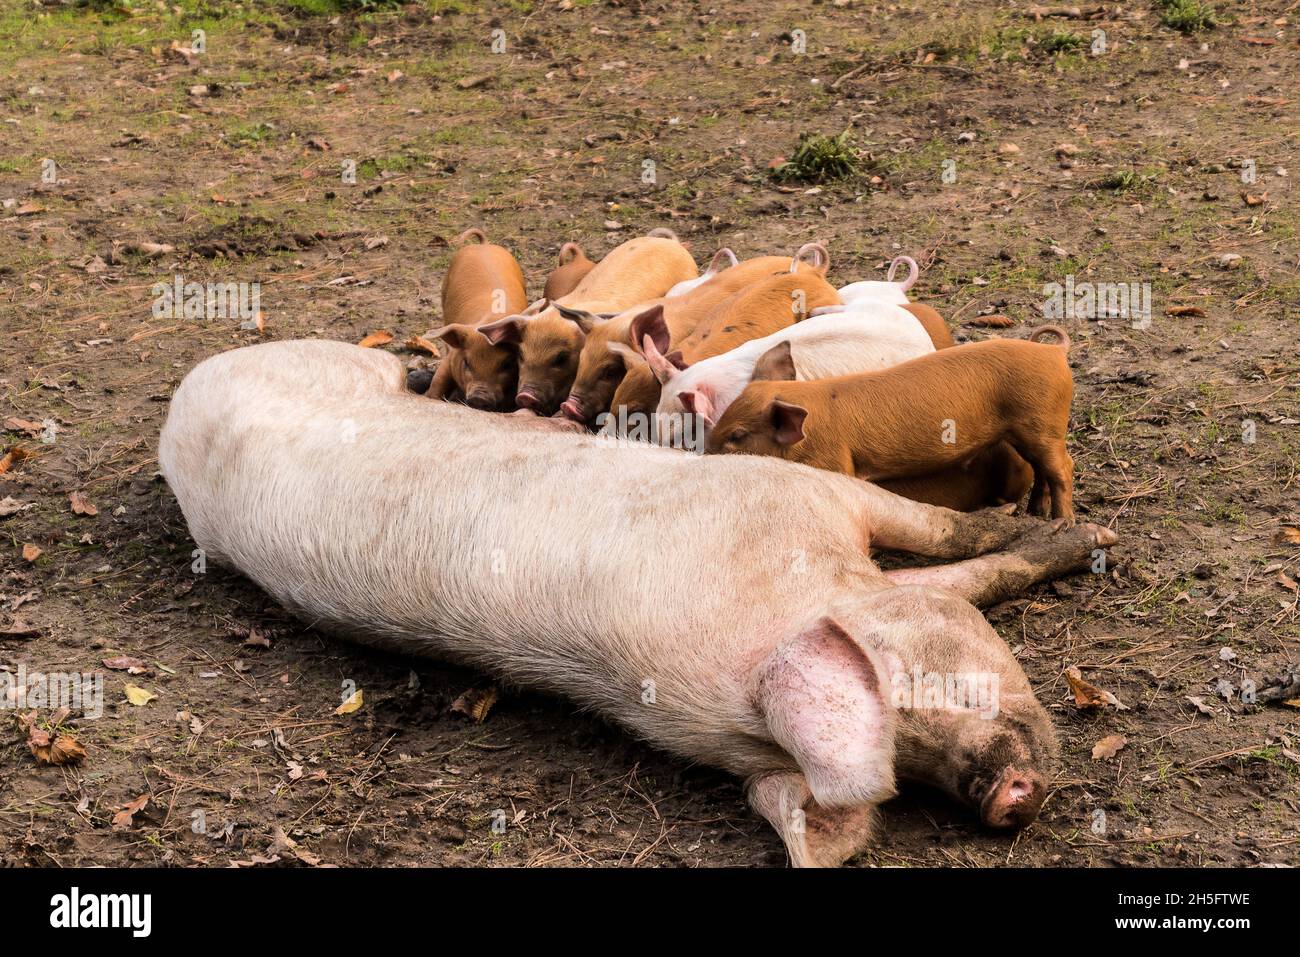 Sow pig suckling piglets Stock Photo